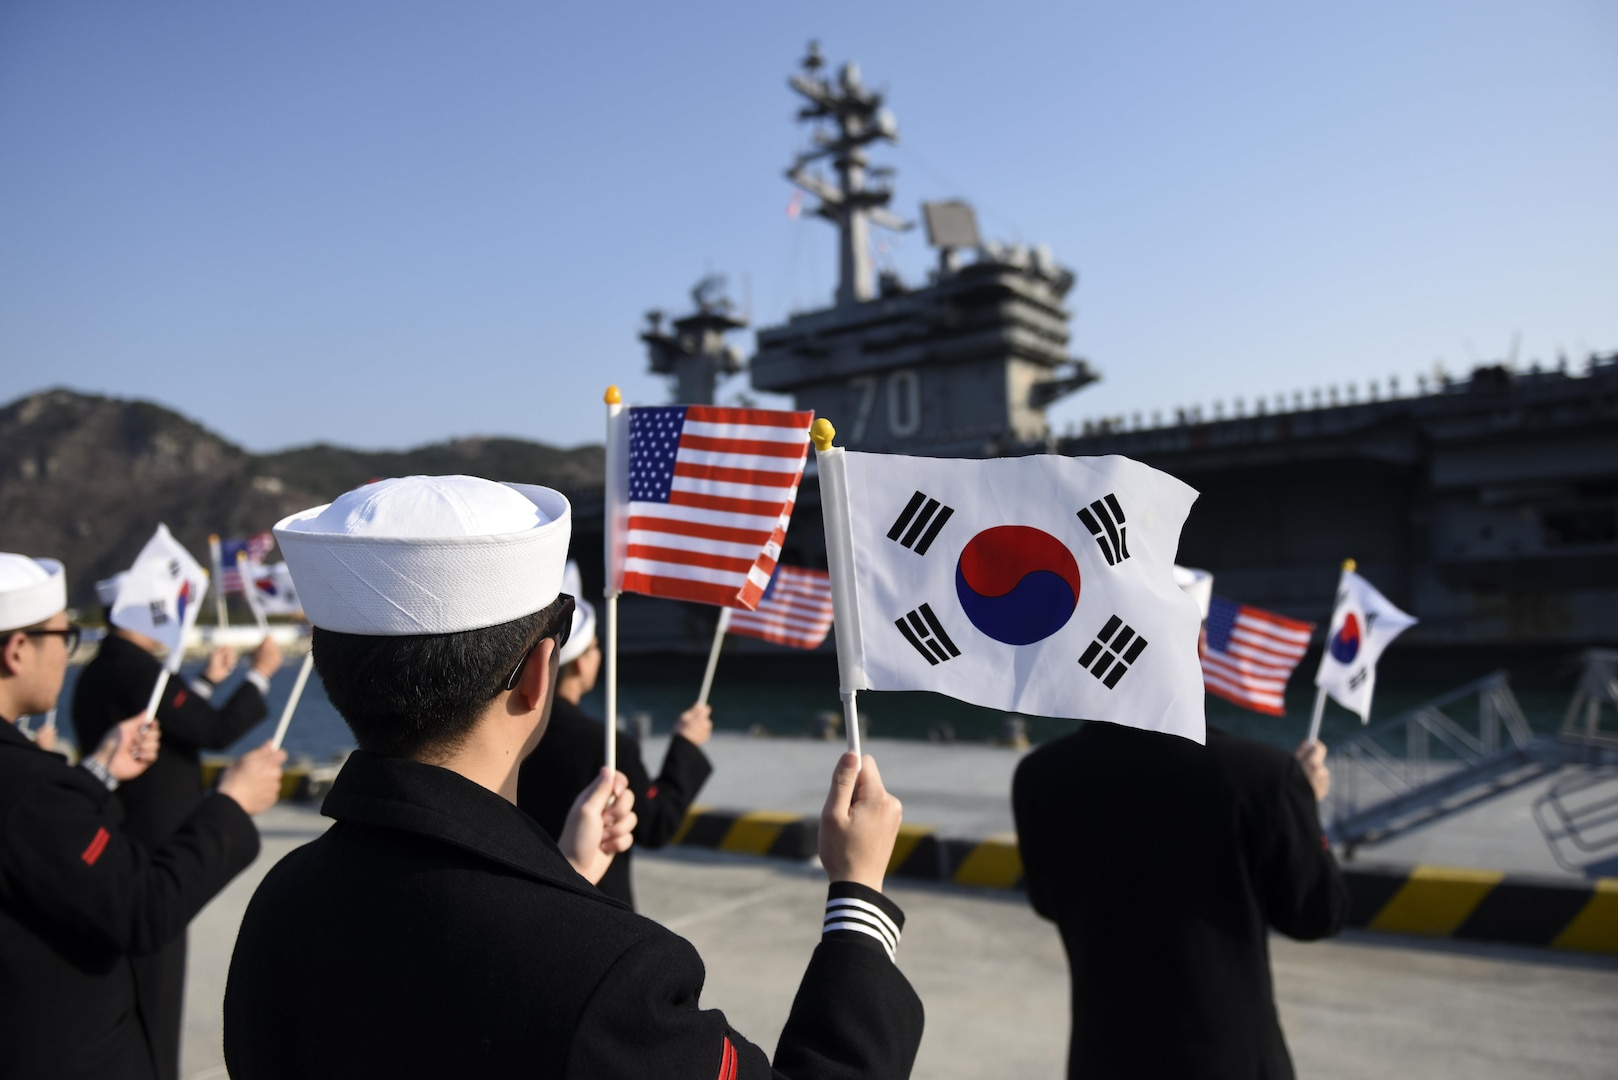 Republic of Korea (ROK) sailors wave flags as Nimitz-class aircraft carrier USS Carl Vinson (CVN-70) pulls into ROK Fleet headquarters, March 15. The Carl Vinson Carrier Strike Group is on a regularly scheduled Western Pacific deployment as part of the U.S. Pacific Fleet-led initiative to extend the command and control functions of U.S. 3rd Fleet. 